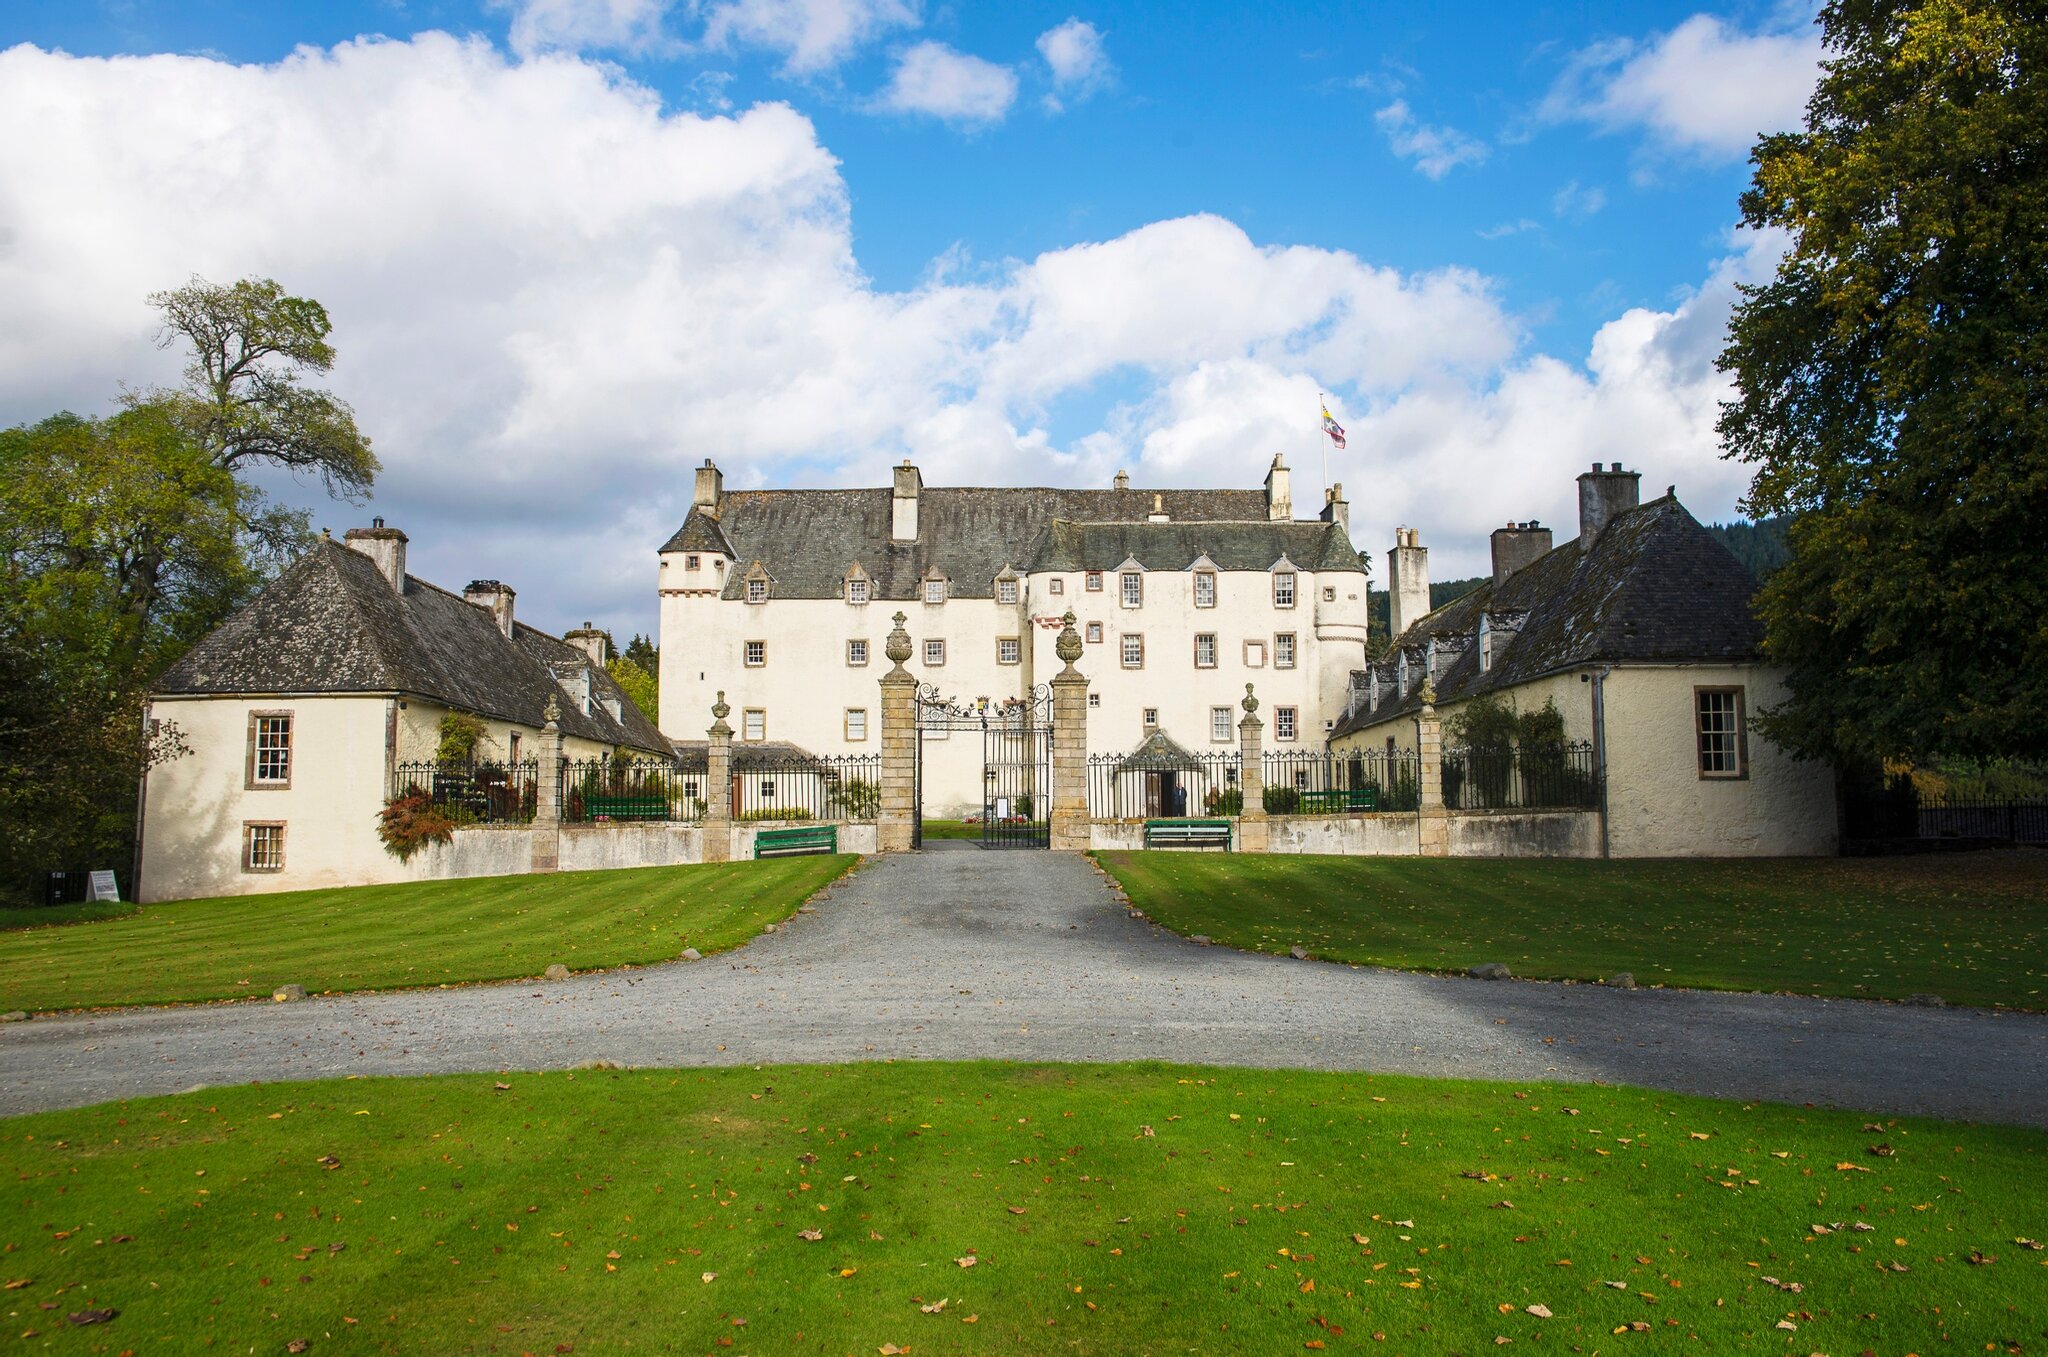 Traquair House dates back to 1107 and has been lived in by the Stuart family since 1491.